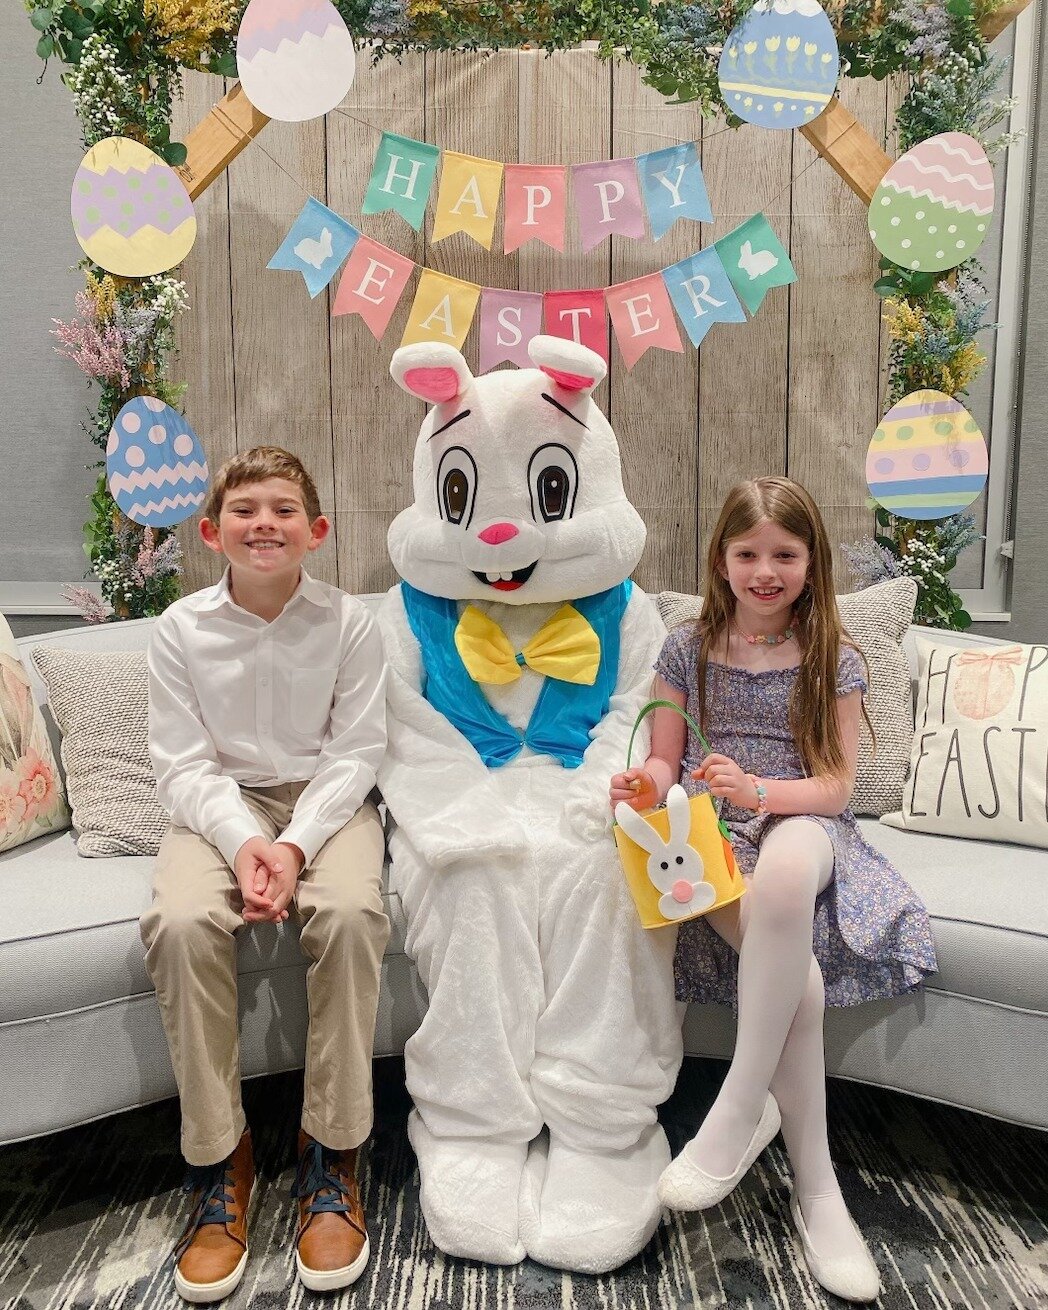 Hop on over to Thorn on Easter Sunday! 🐰🍽️

From savory classics to sweet treats, there's something for everyone to enjoy. And with 2️⃣ seatings available, you can make sure your Easter plans fit perfectly into your schedule. Make your reservation 